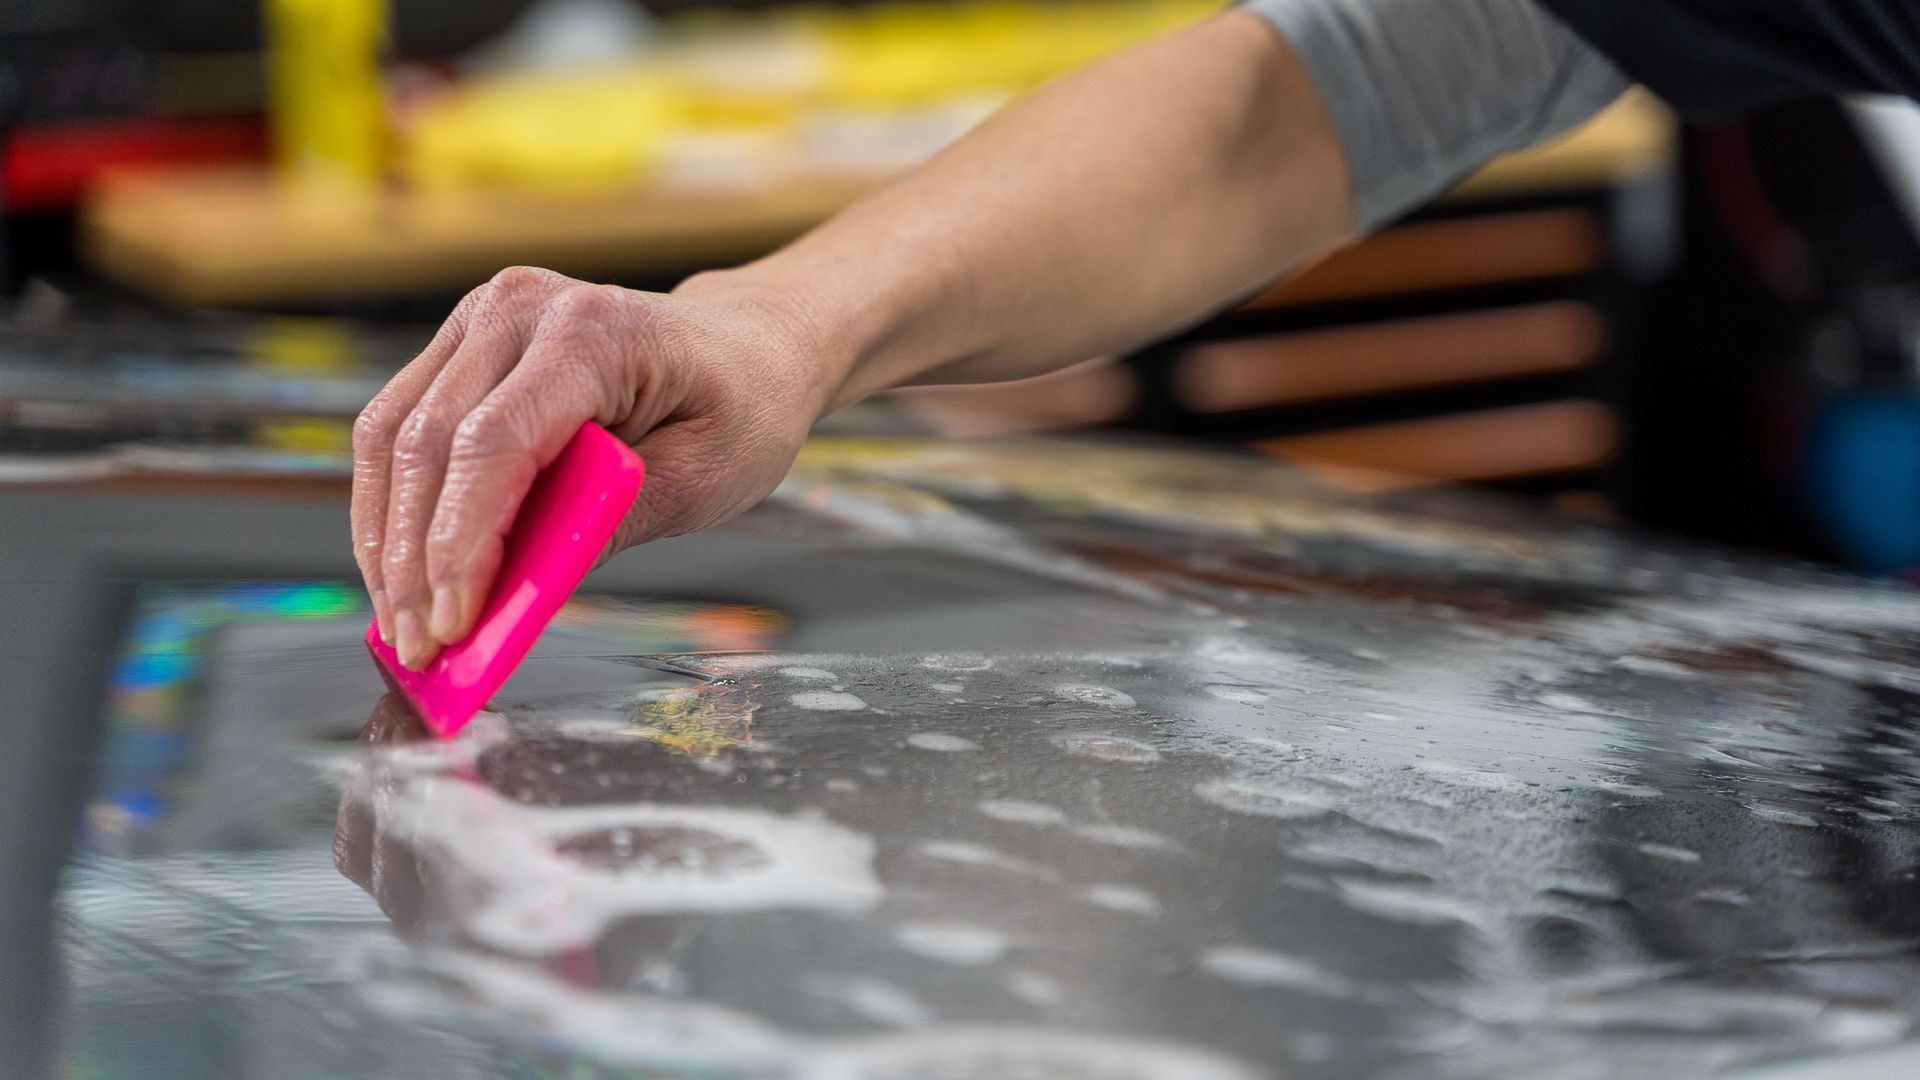 a person is using a pink squeegee to clean a surface